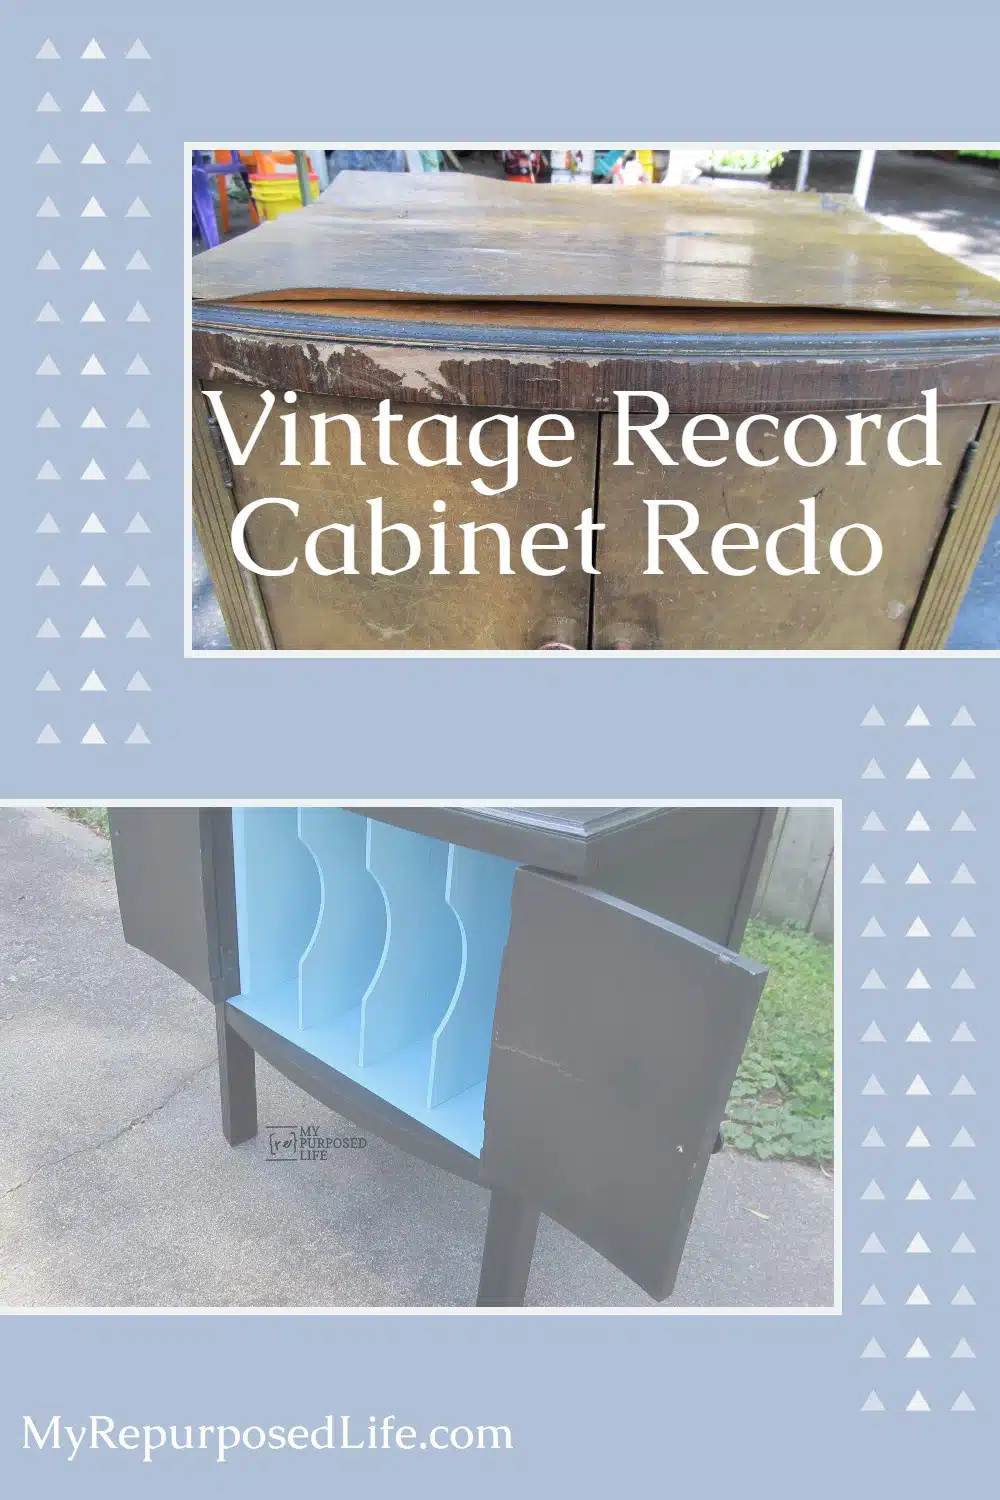 A curb find, this record cabinet was in sad shape, but Gail thought it was worthy of a little makeover. She will show you how to deal with bad veneer. #MyRepurposedLife #upcycle #recordcabinet via @repurposedlife